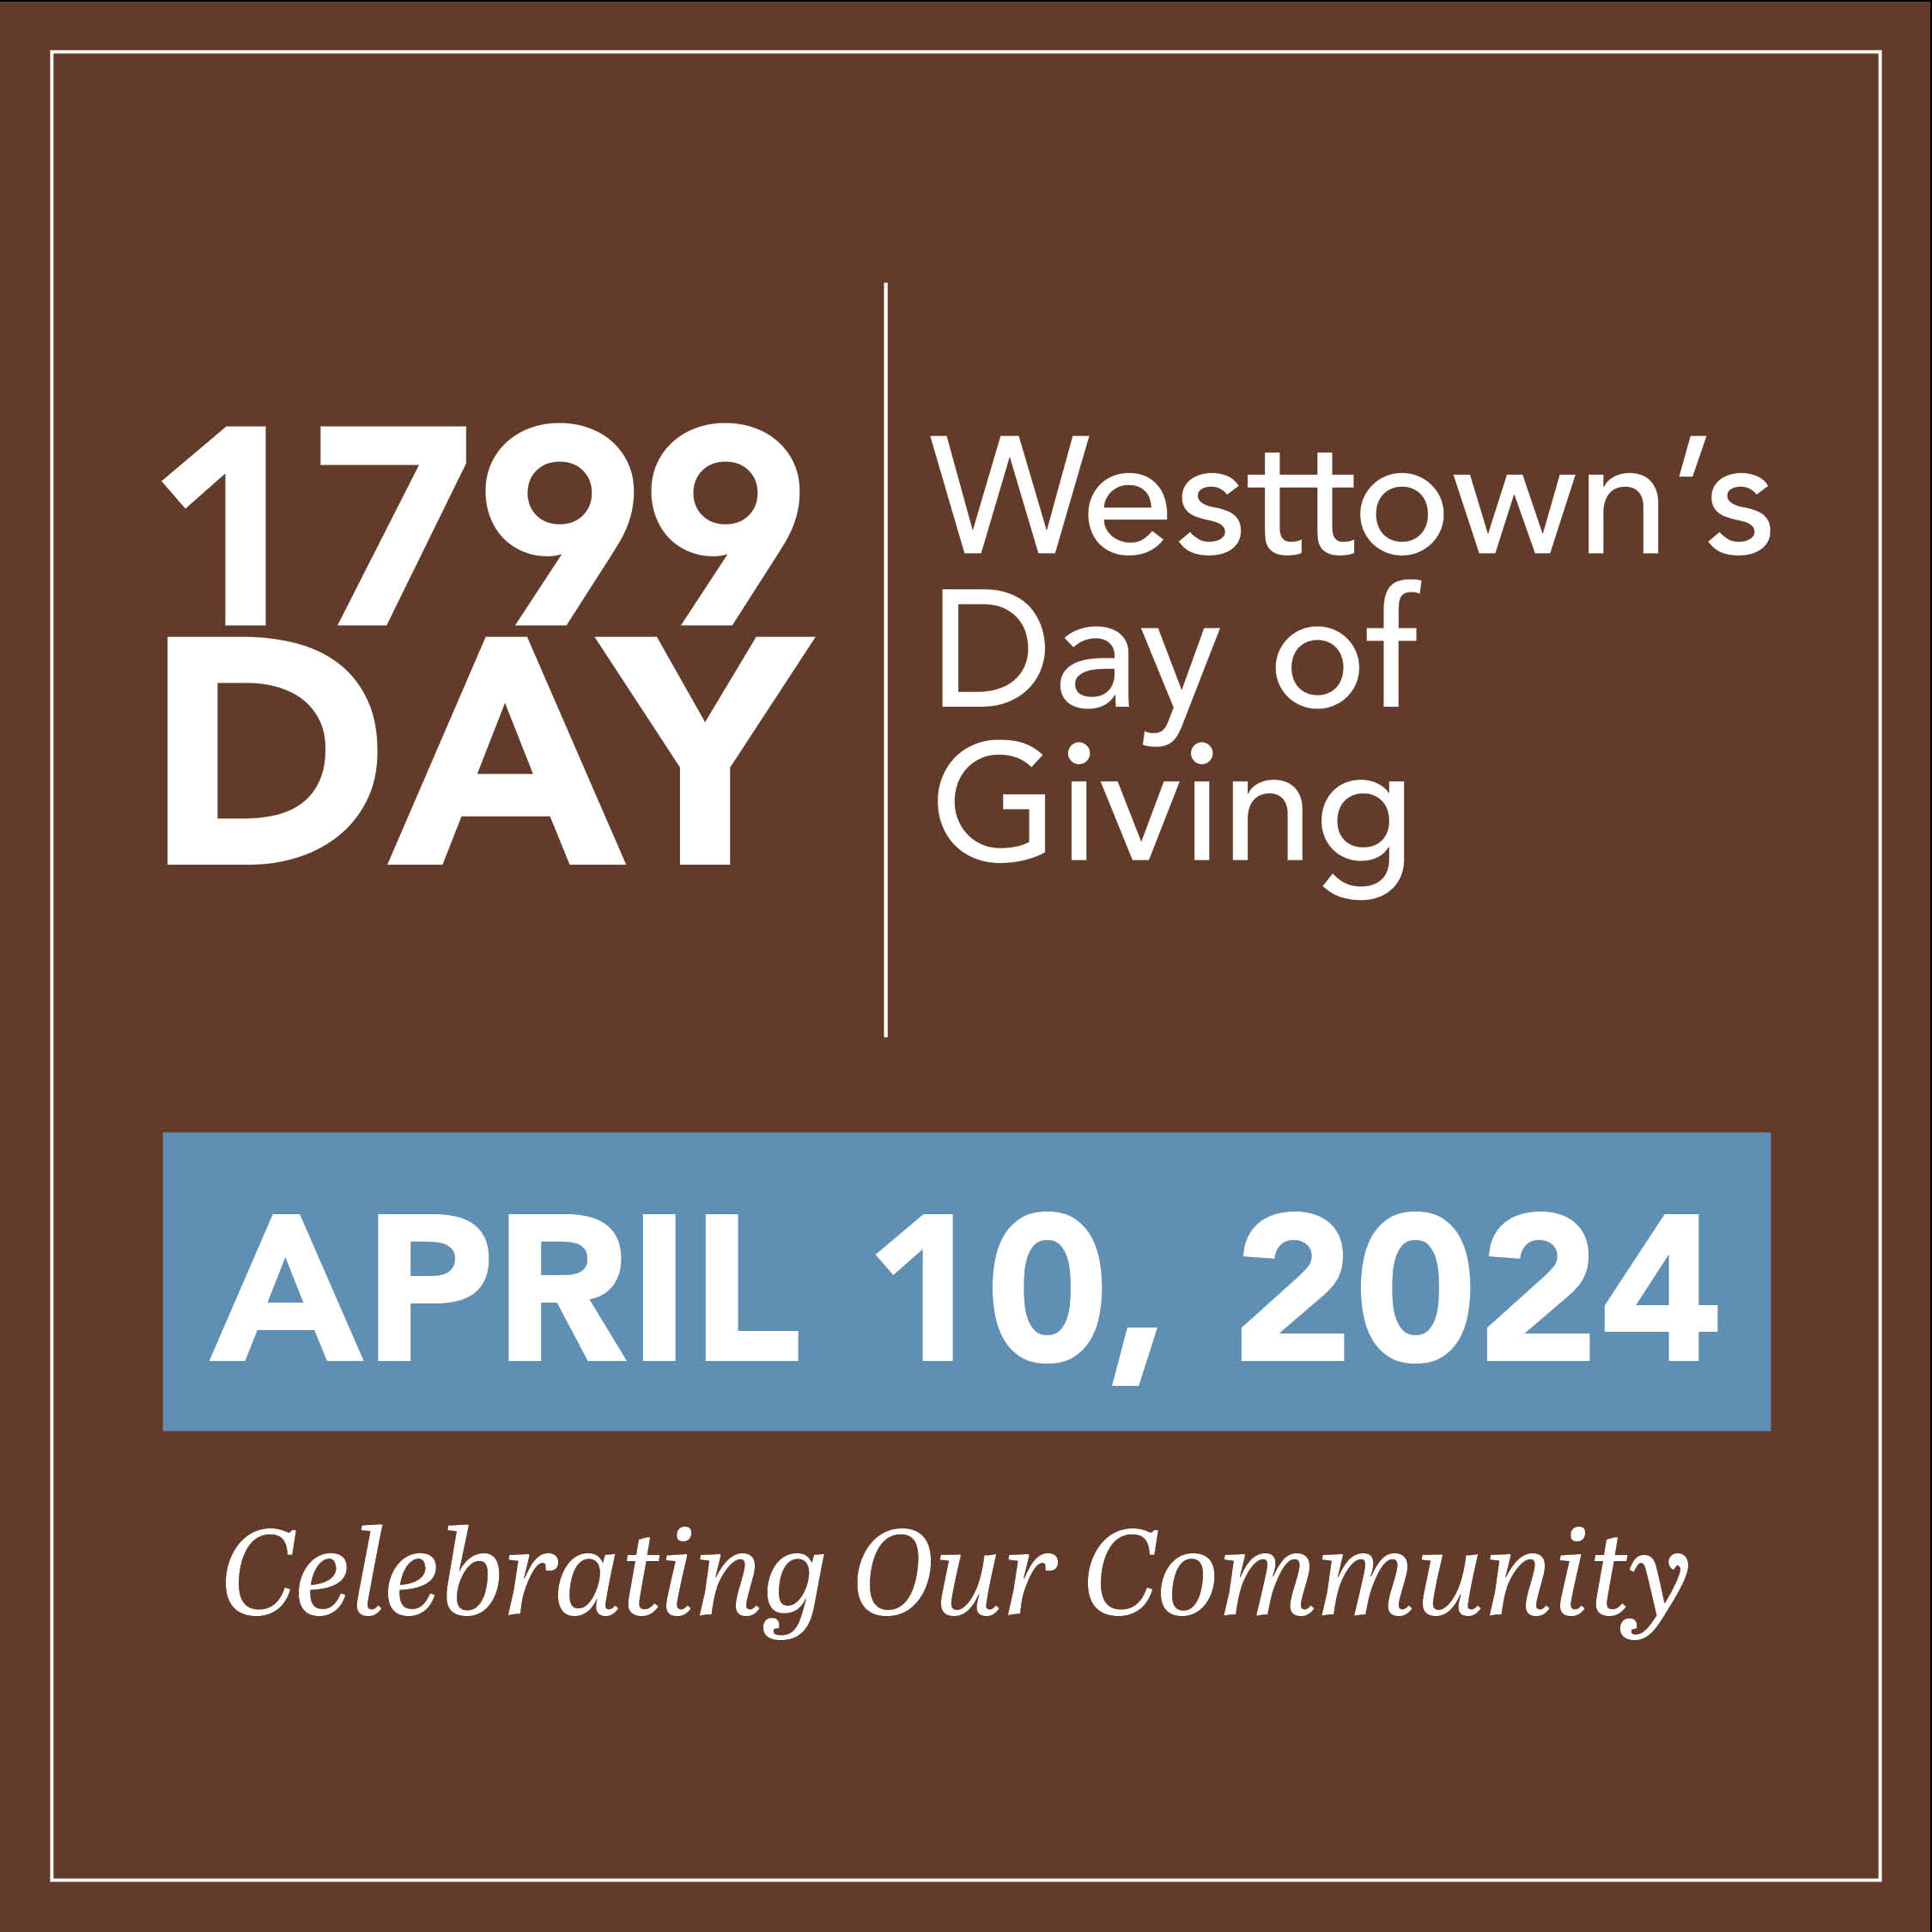 1799 Day: Record Day of Giving